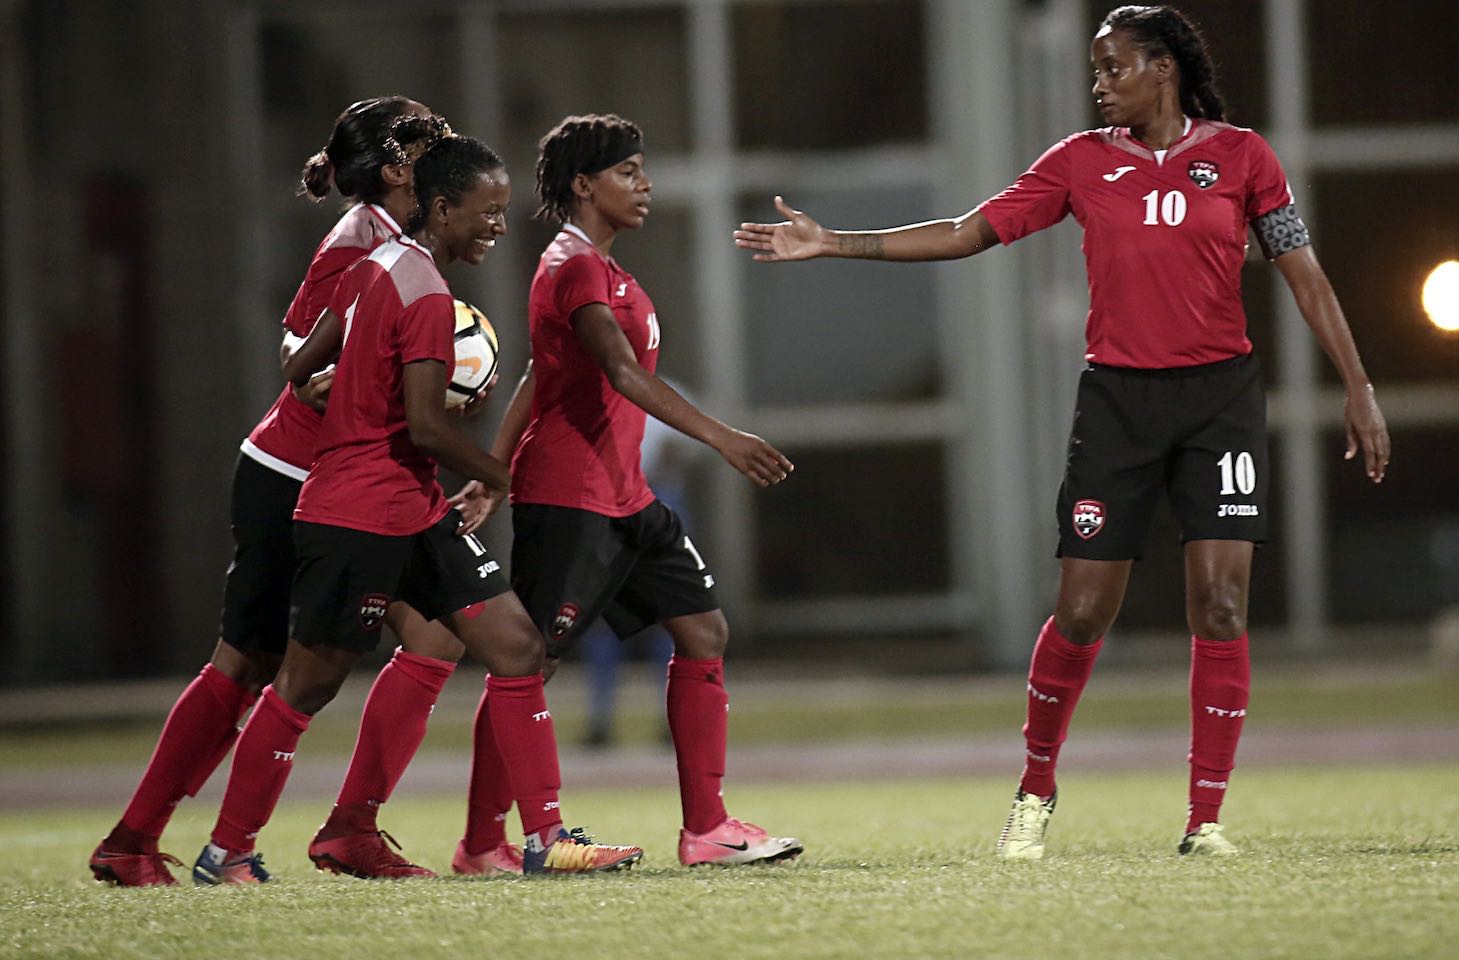 T&T secures top spot in Group C with 13-0 win over Grenada.